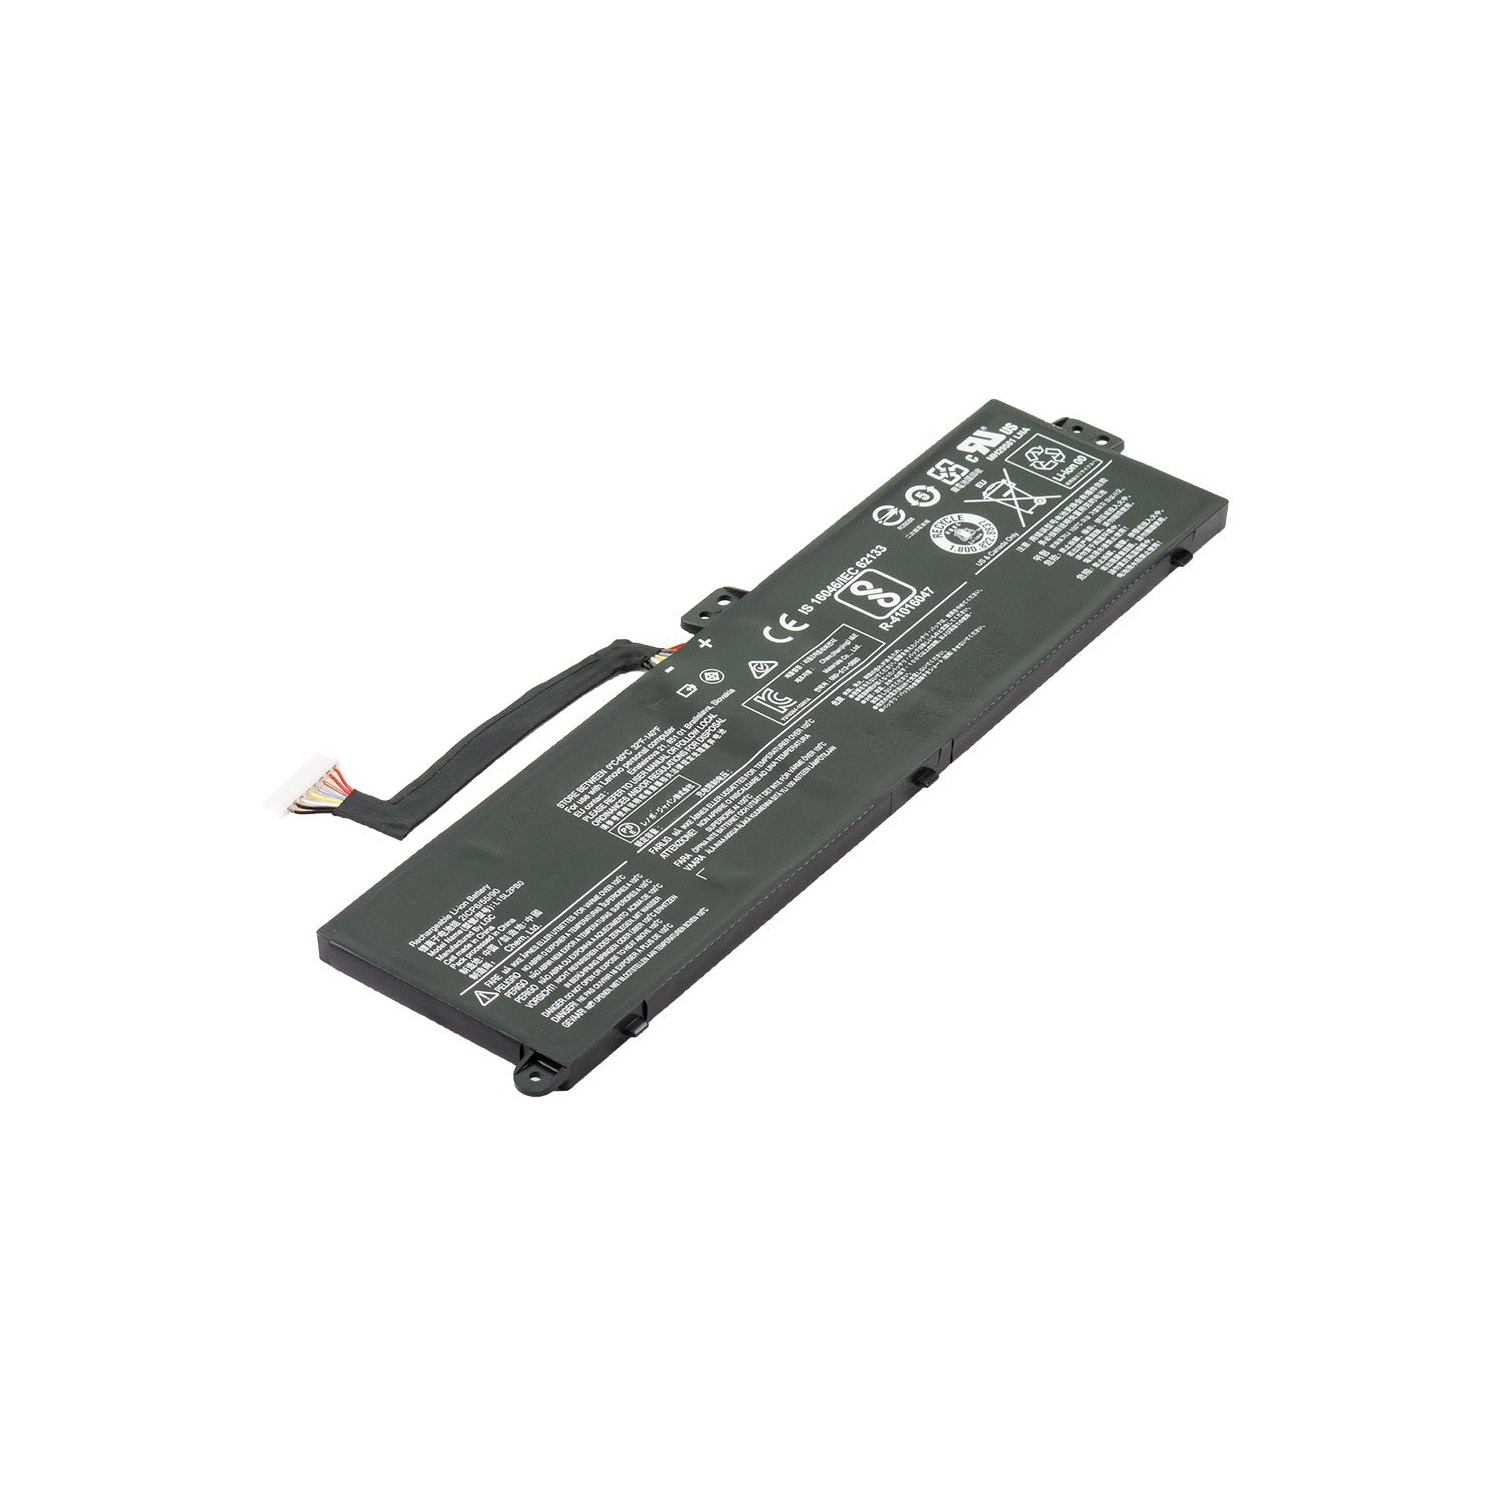 Laptop Battery Replacement for Lenovo 100S Chromebook-11IBY 80QN0002US, 5B10J46559, 5B10J46560, 5B10J46561, L15L2PB0, L15M2PB0